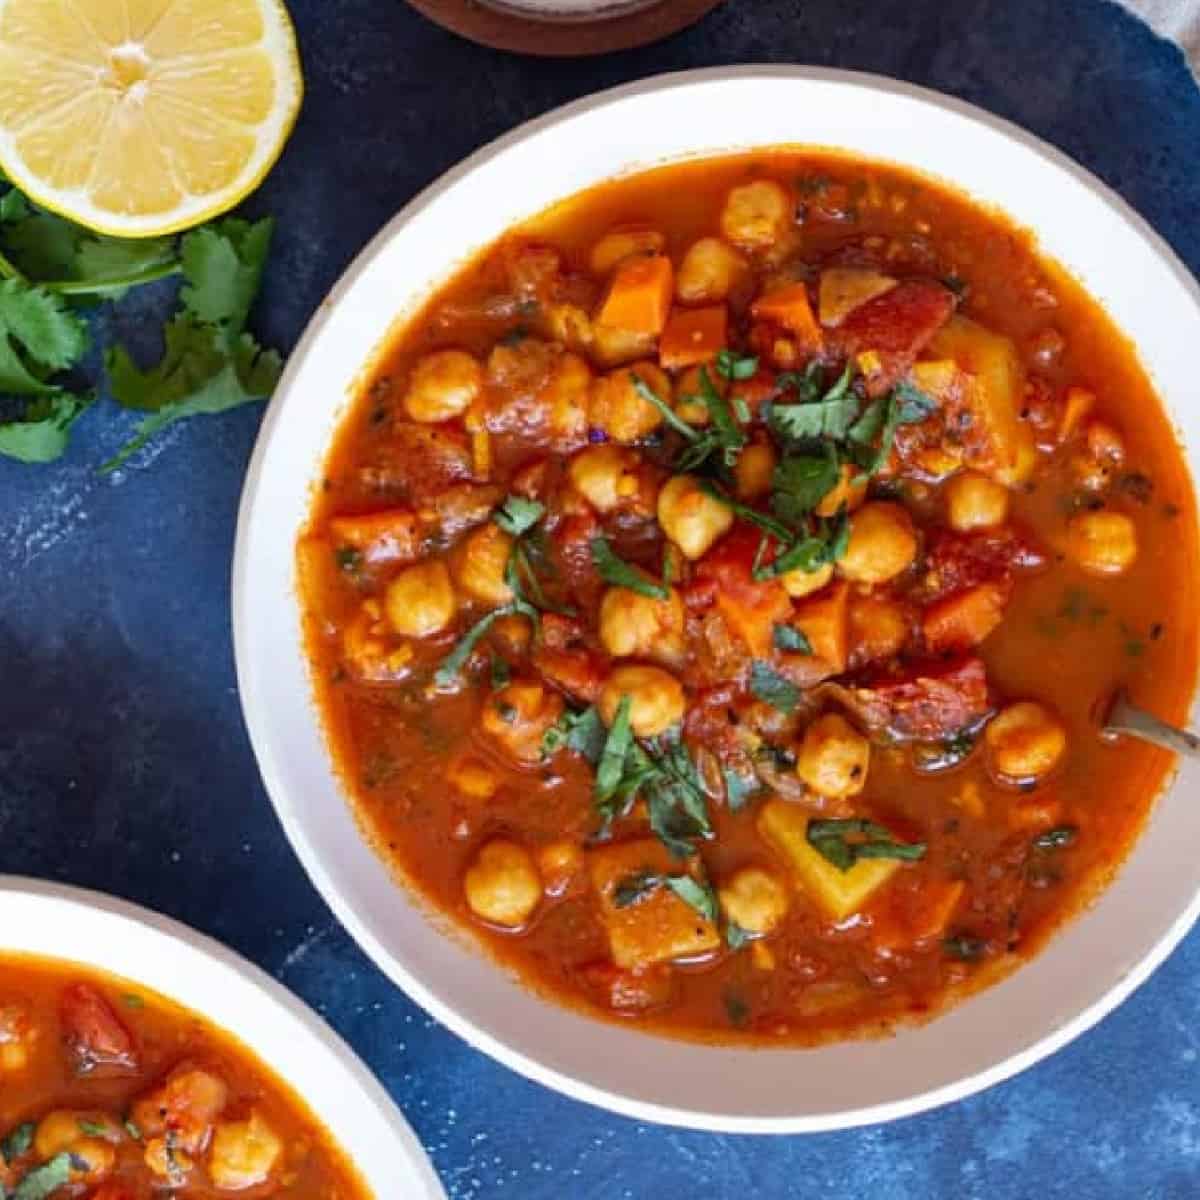 Moroccan chickpea stew
